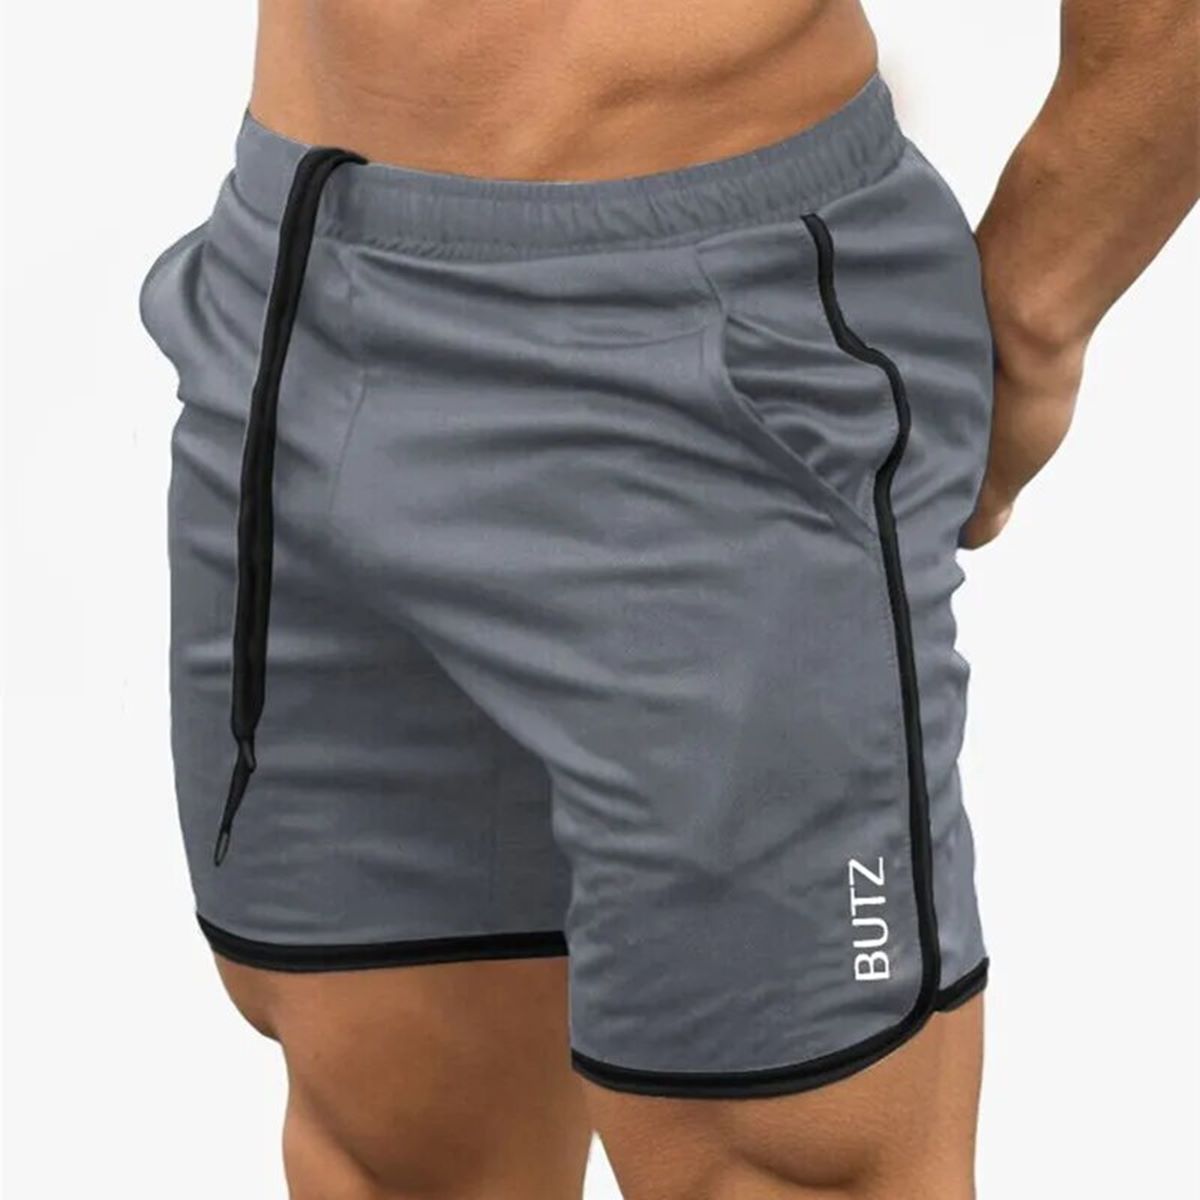 10 Incredible Jogging Shorts For 2023